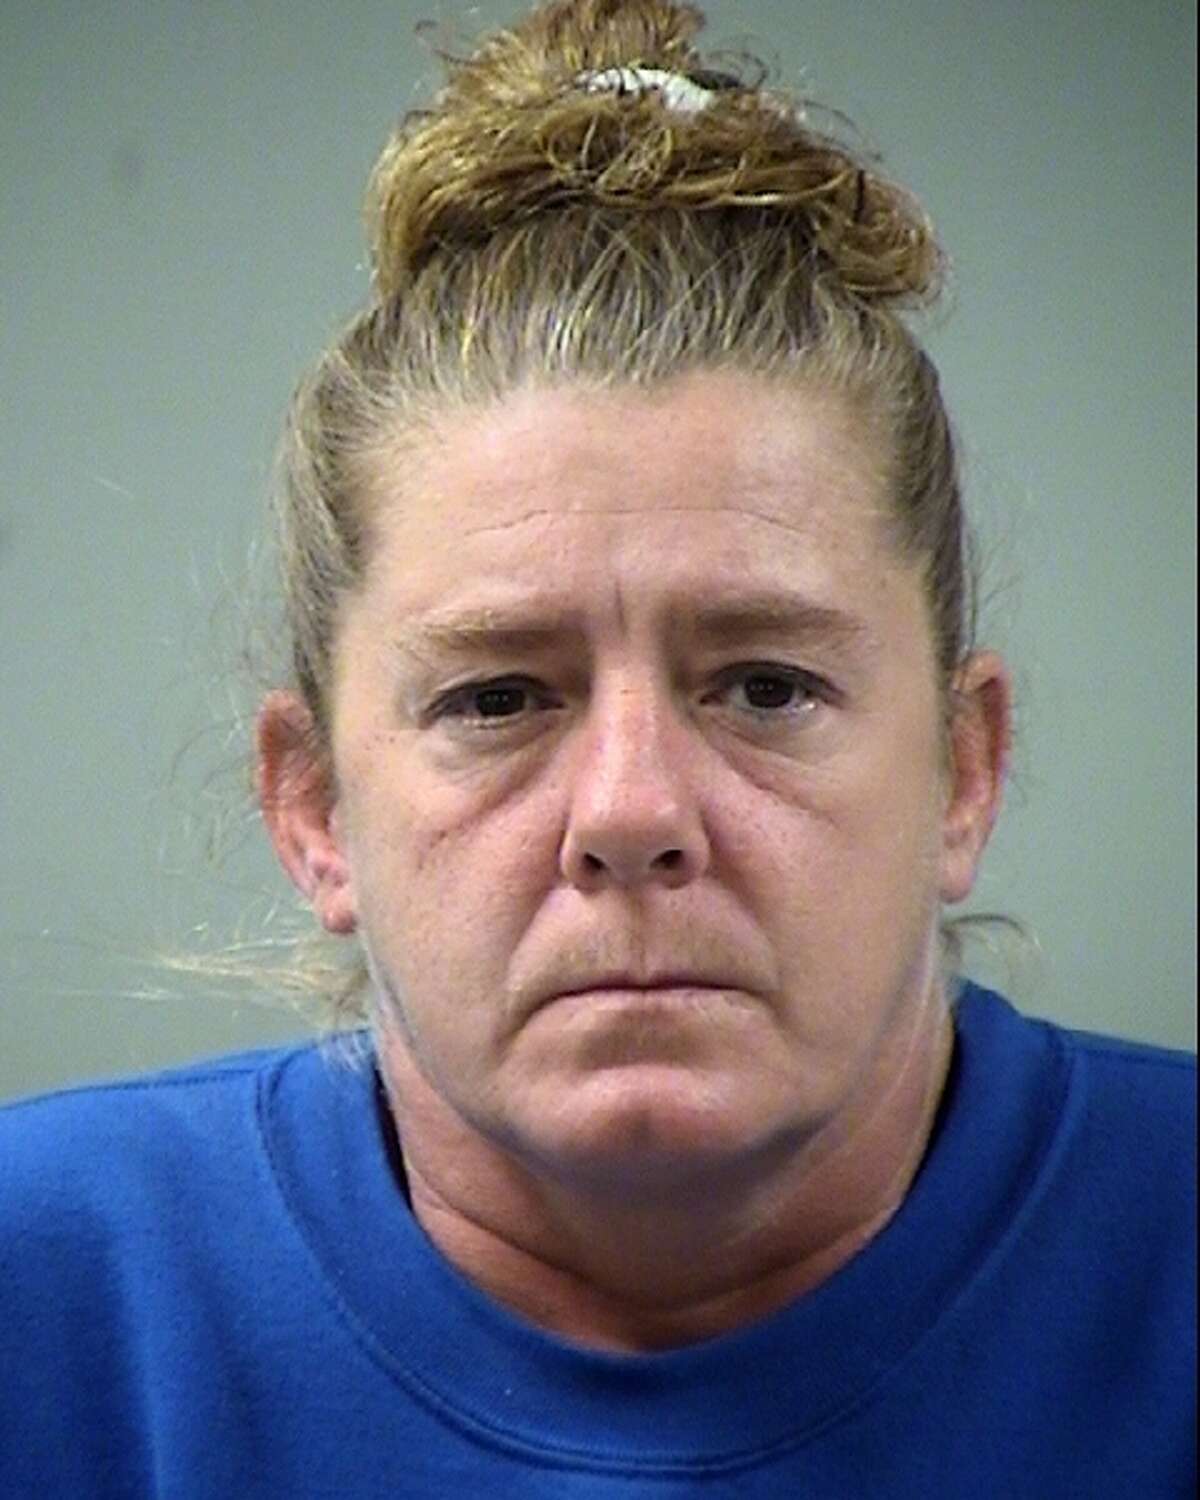 Regina Anne Shaw, 45, has been charged in the theft of more tha $6,400 in Kiolbassa sausage.